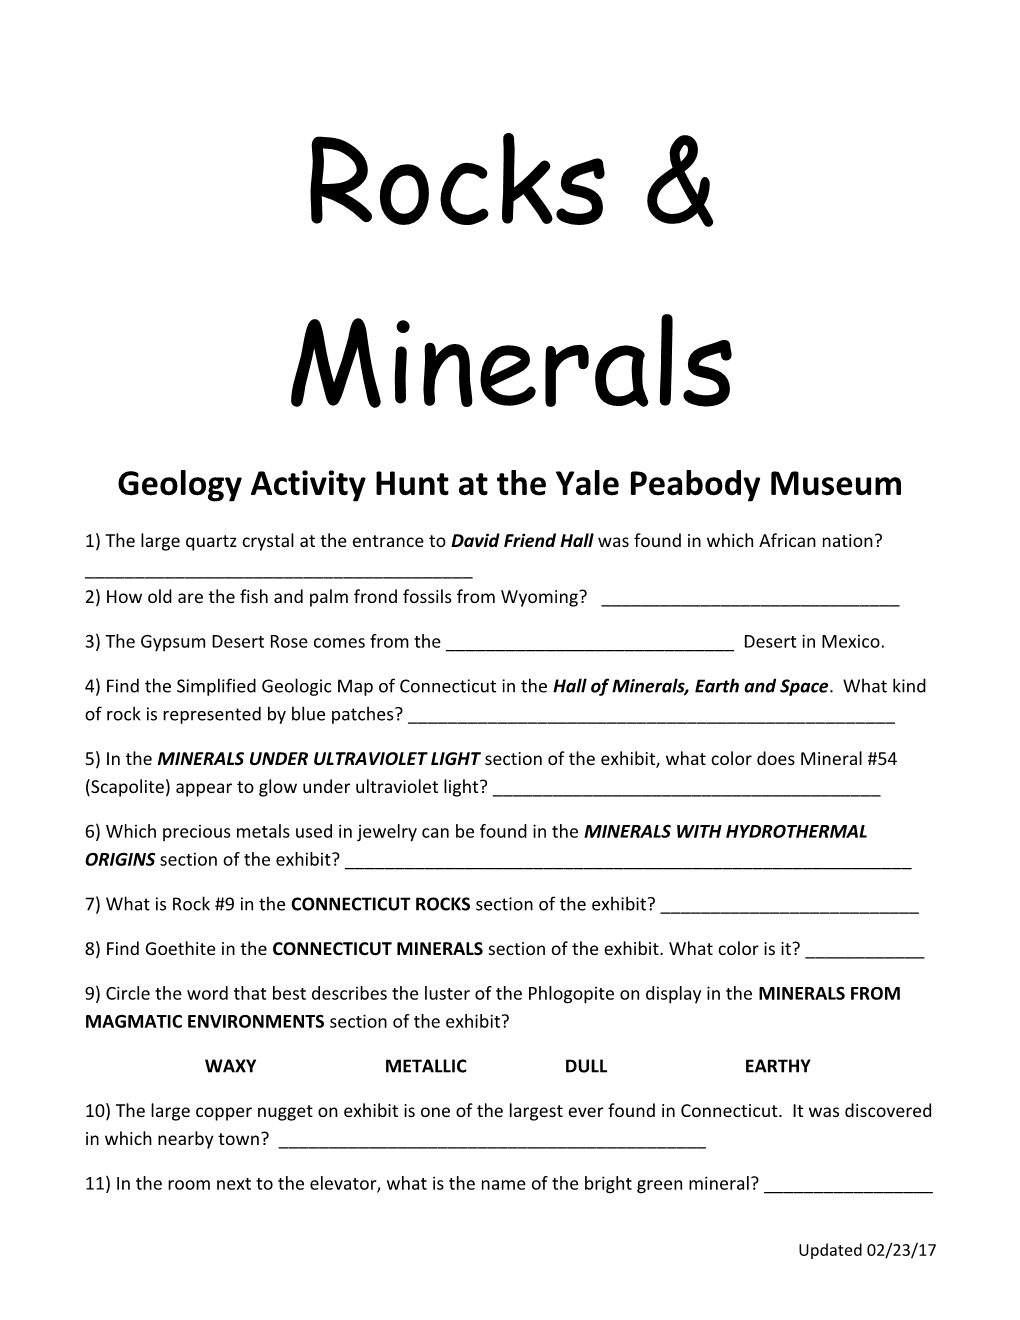 Geology Activity Hunt at the Yale Peabody Museum